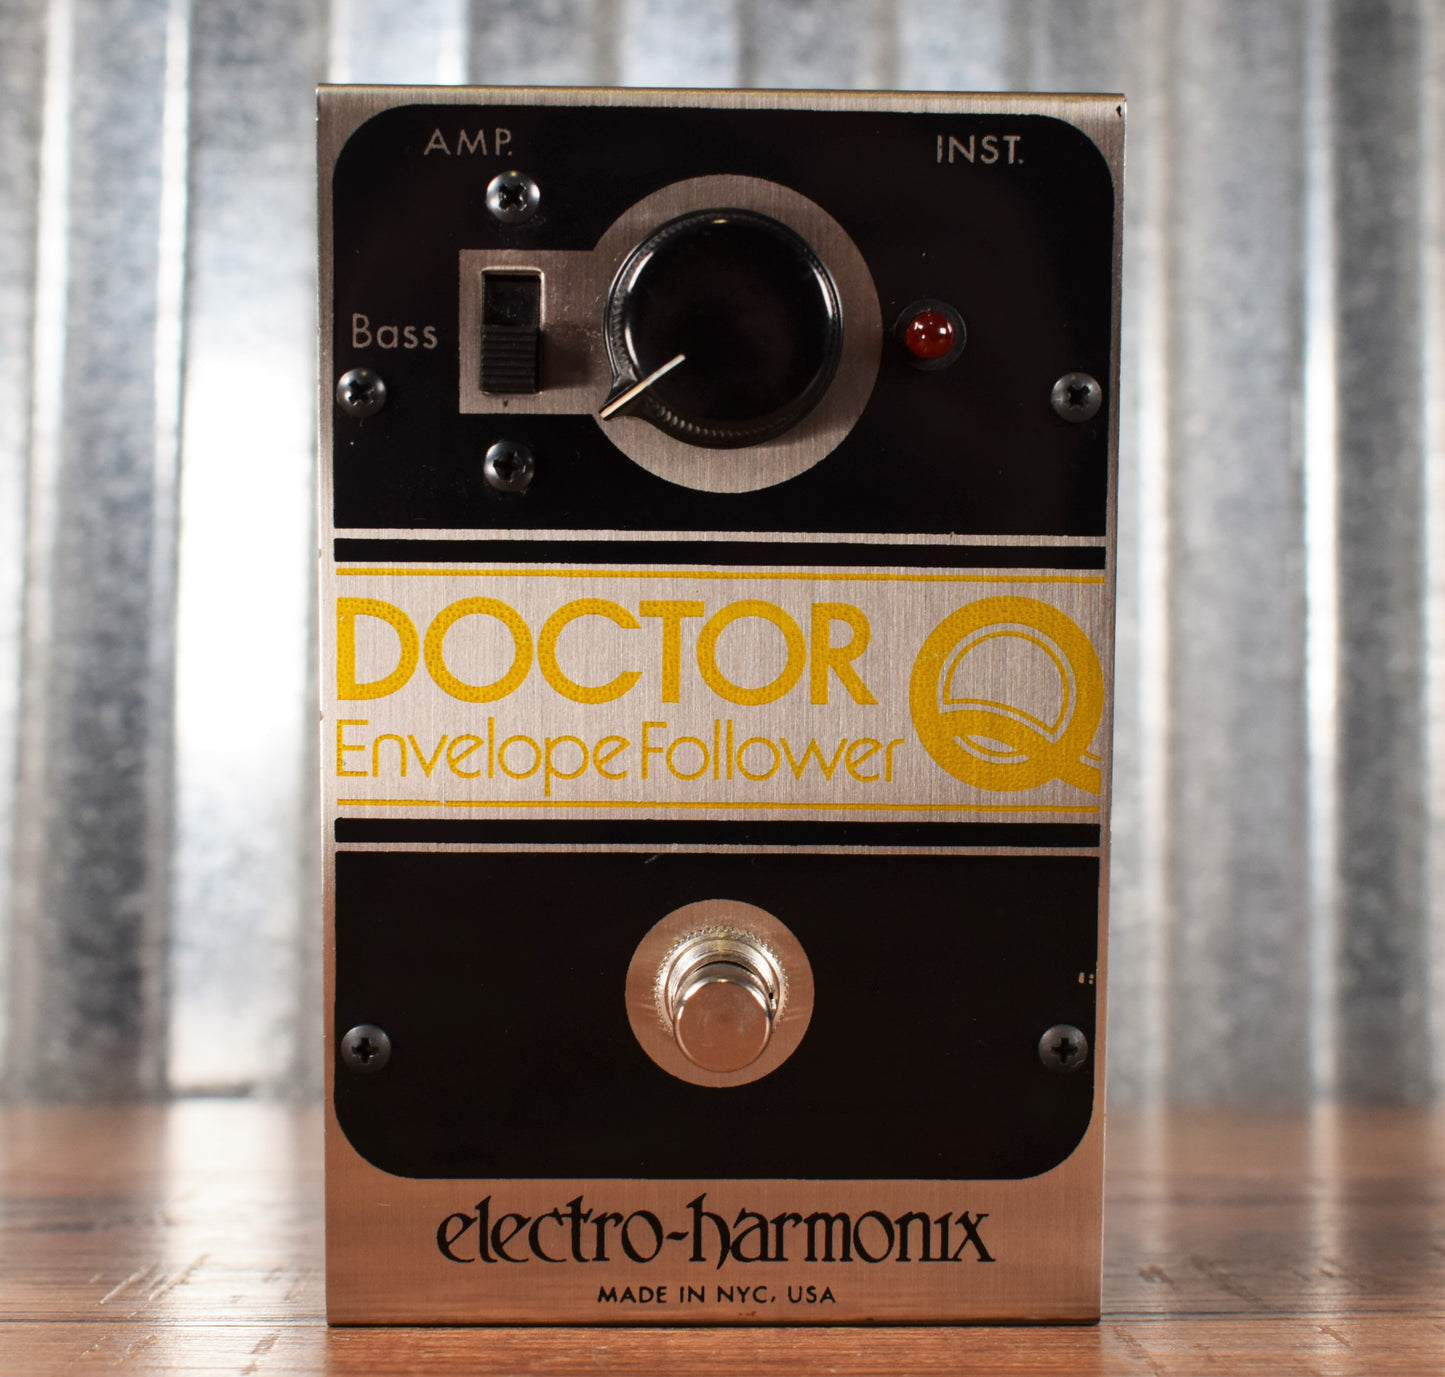 Electro-Harmonix EHX Doctor Q Envelope Follower Reissue 2000's Guitar Filter Effect Pedal & Power Supply Used